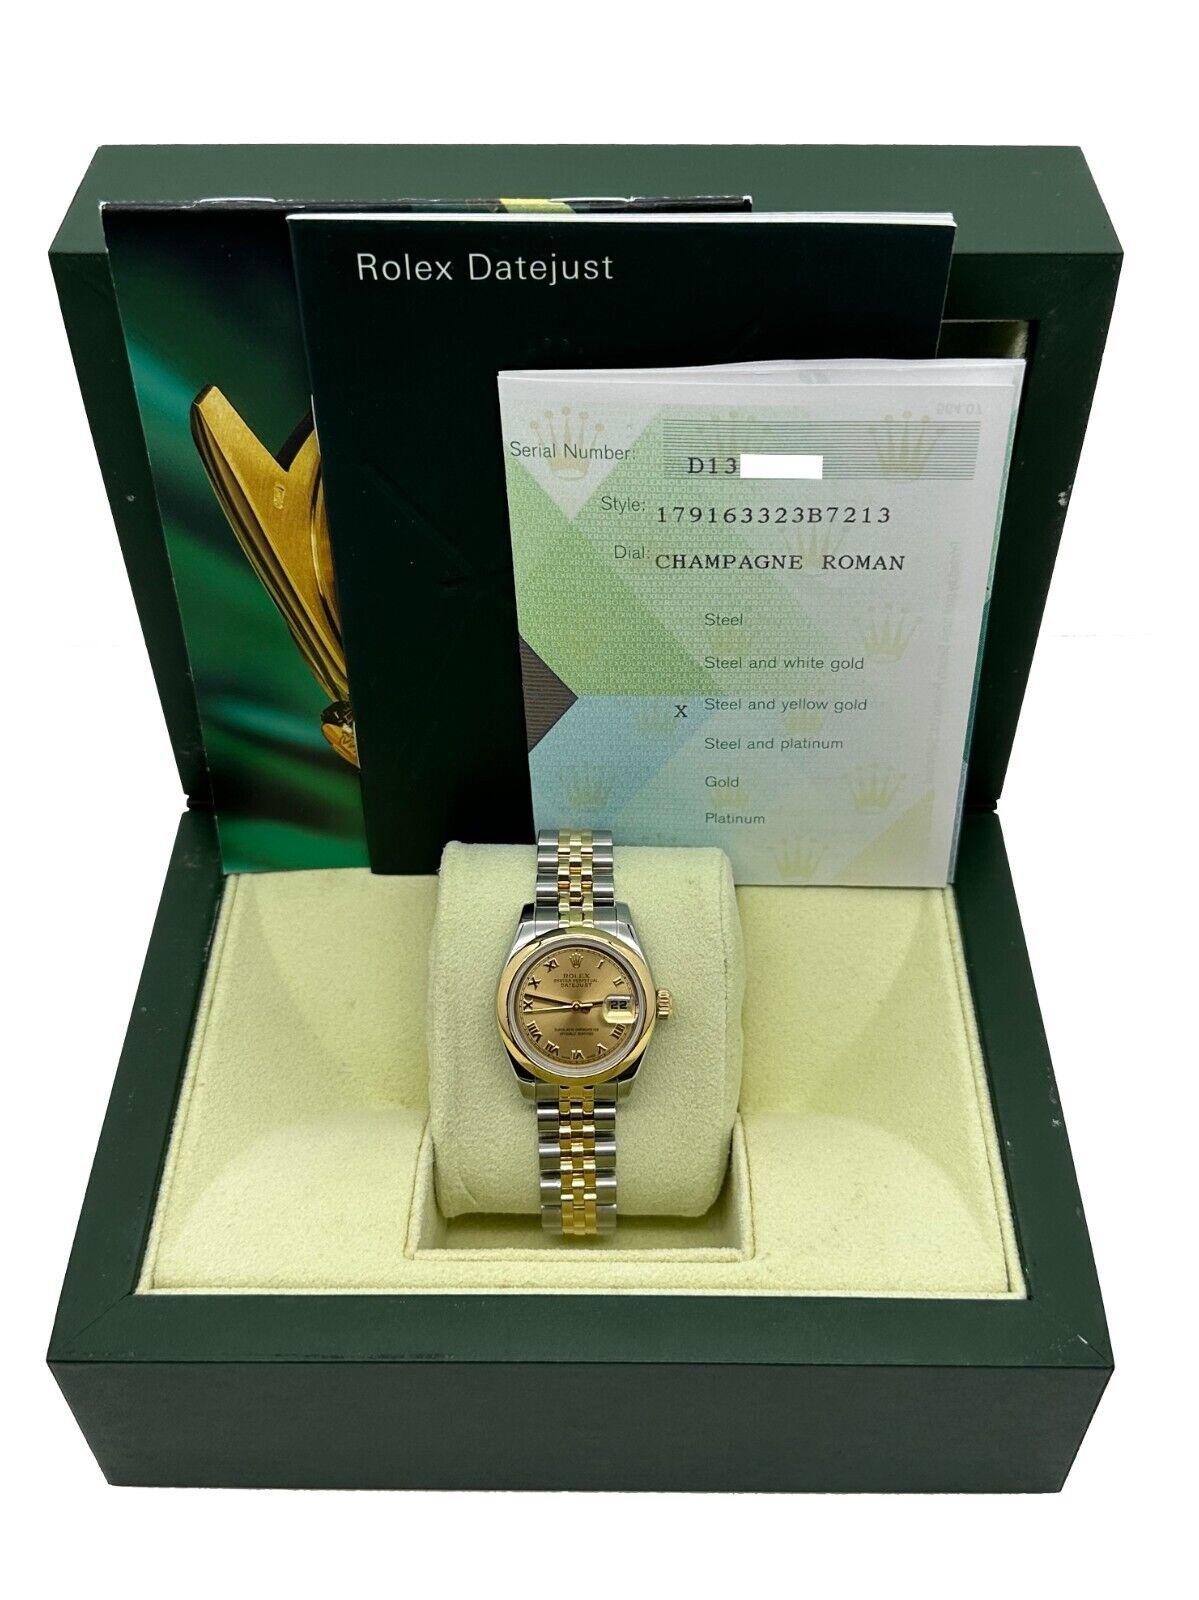 Style Number: 179163

Serial: D130***

Purchase Date: Sold in 2011
 
Model: Ladies Datejust 
 
Case Material: Stainless Steel
 
Band: 18K Yellow Gold & Stainless Steel 
 
Bezel: 18K Yellow Gold 
 
Dial: Champagne Roman Numeral Dial 
 
Face: Sapphire